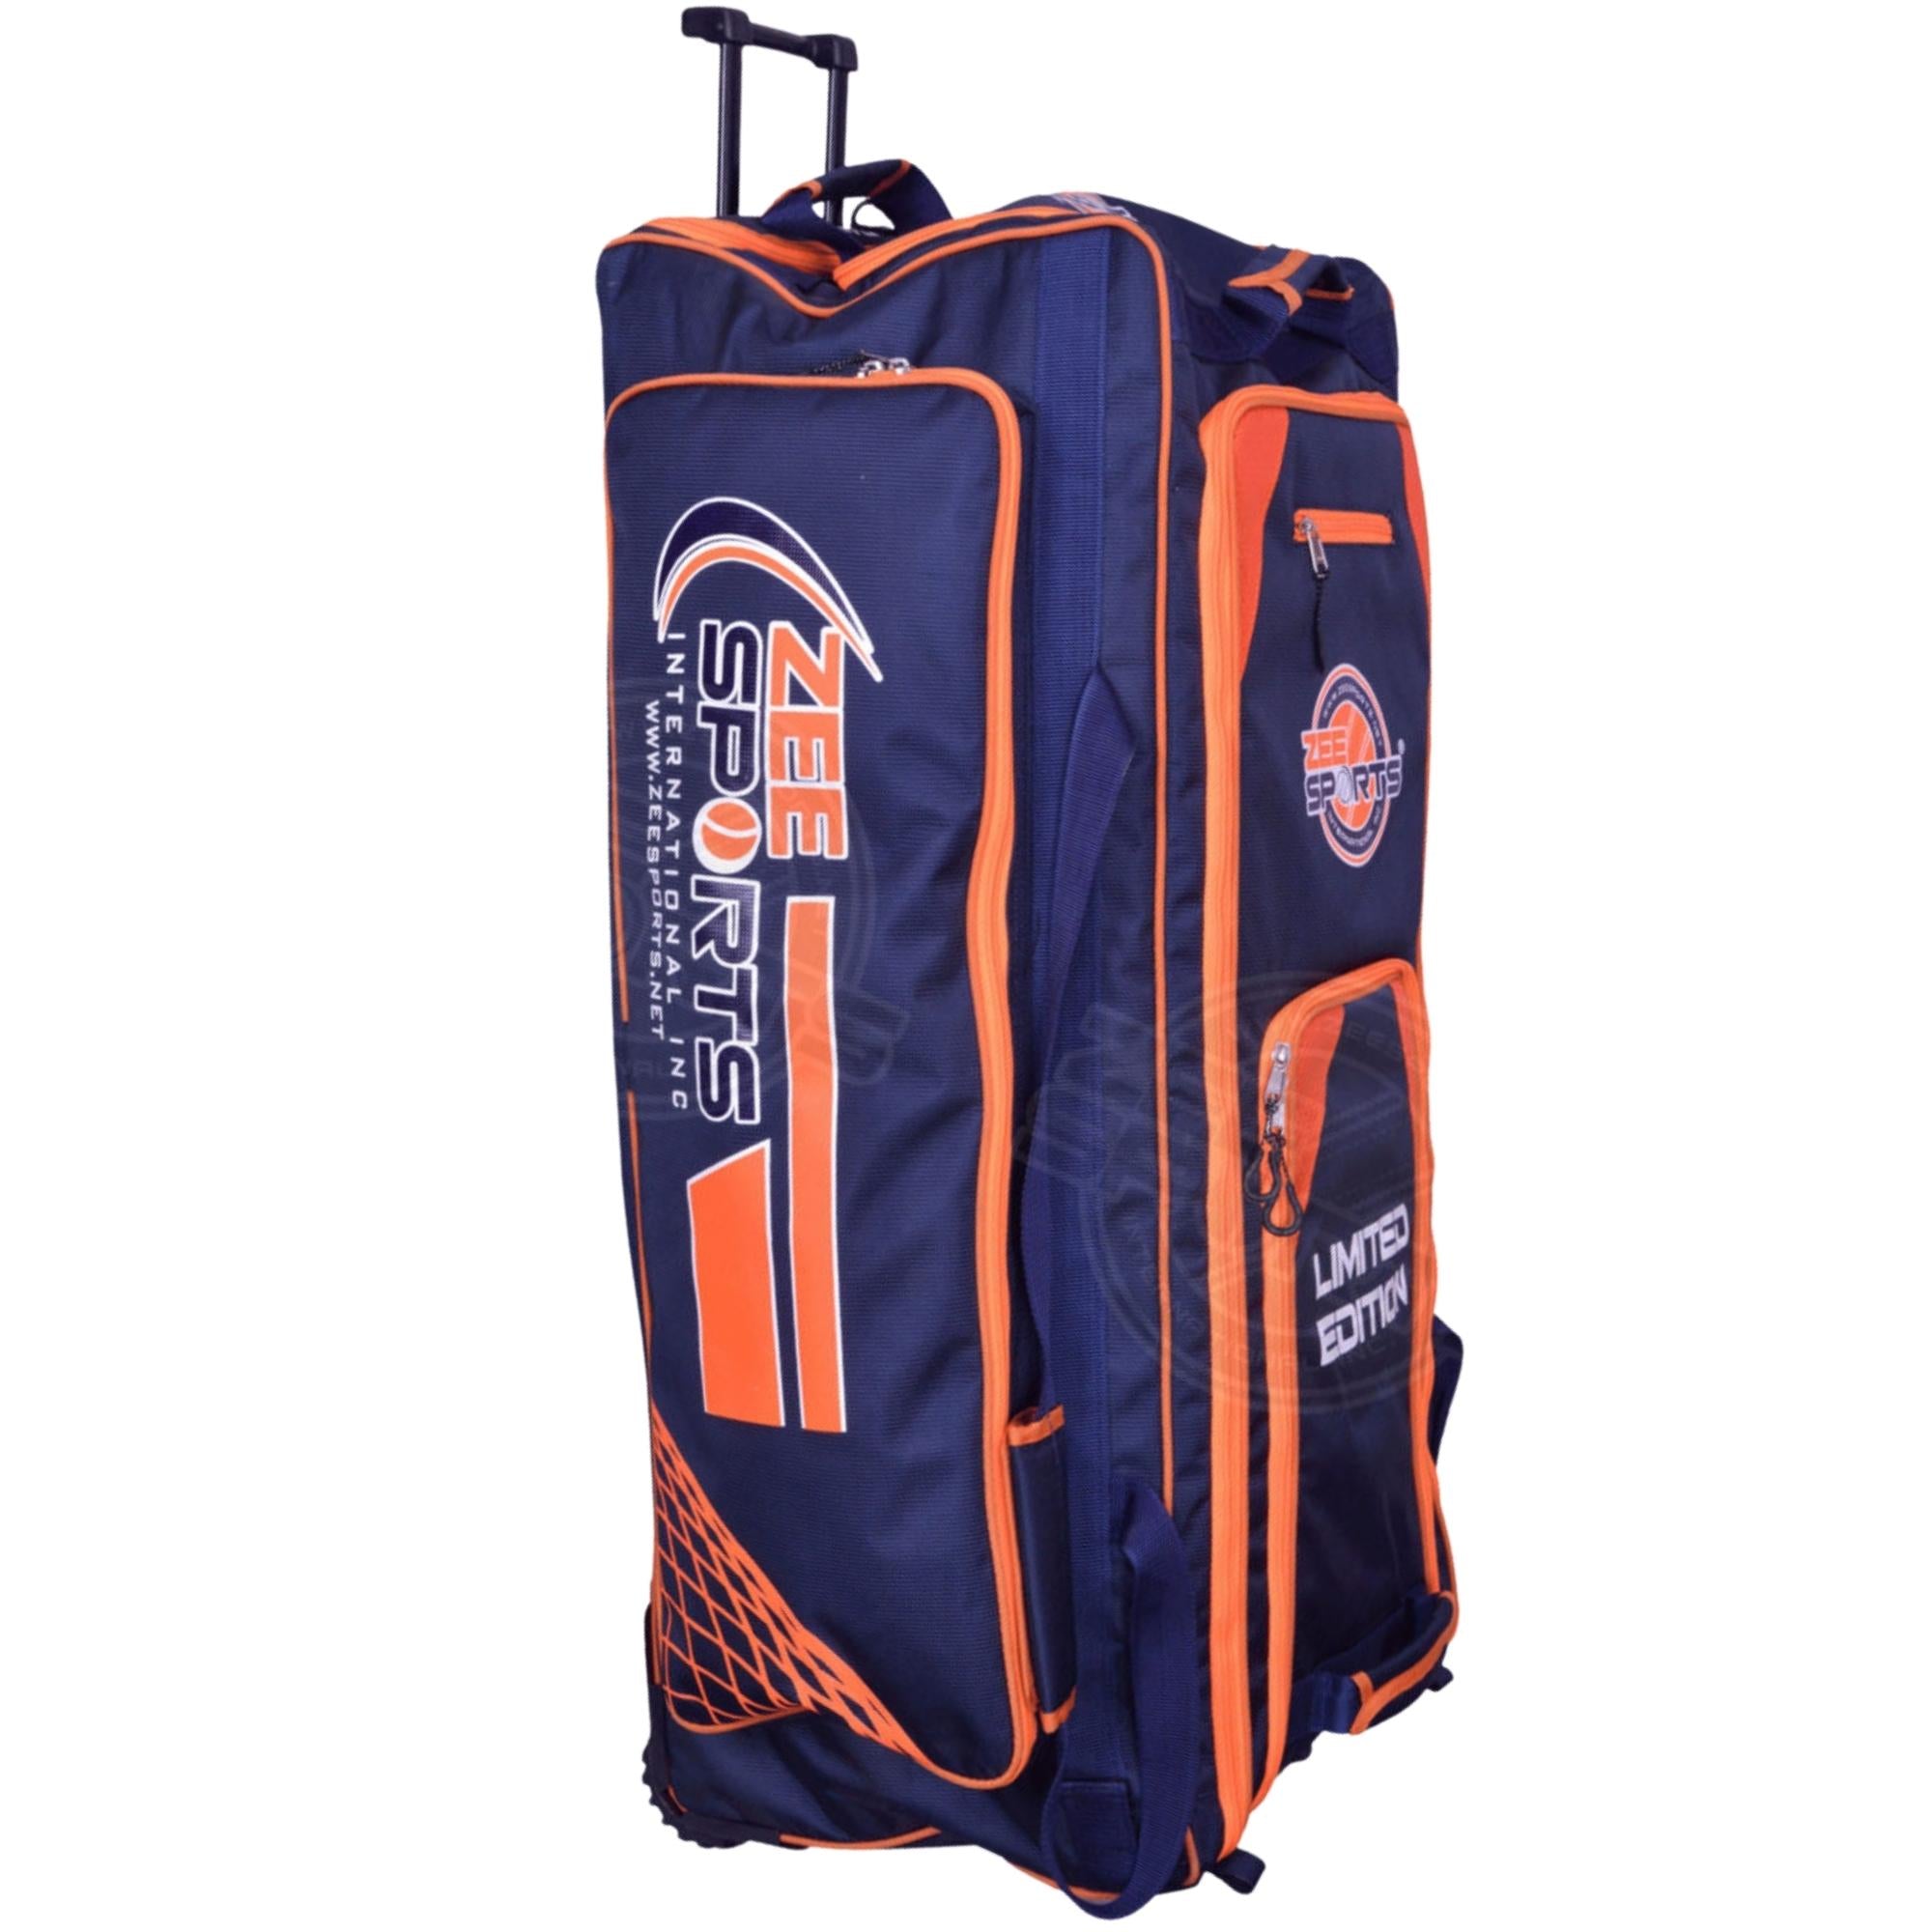 Zee Sports Limited Edition Kit Bag with Ice Box